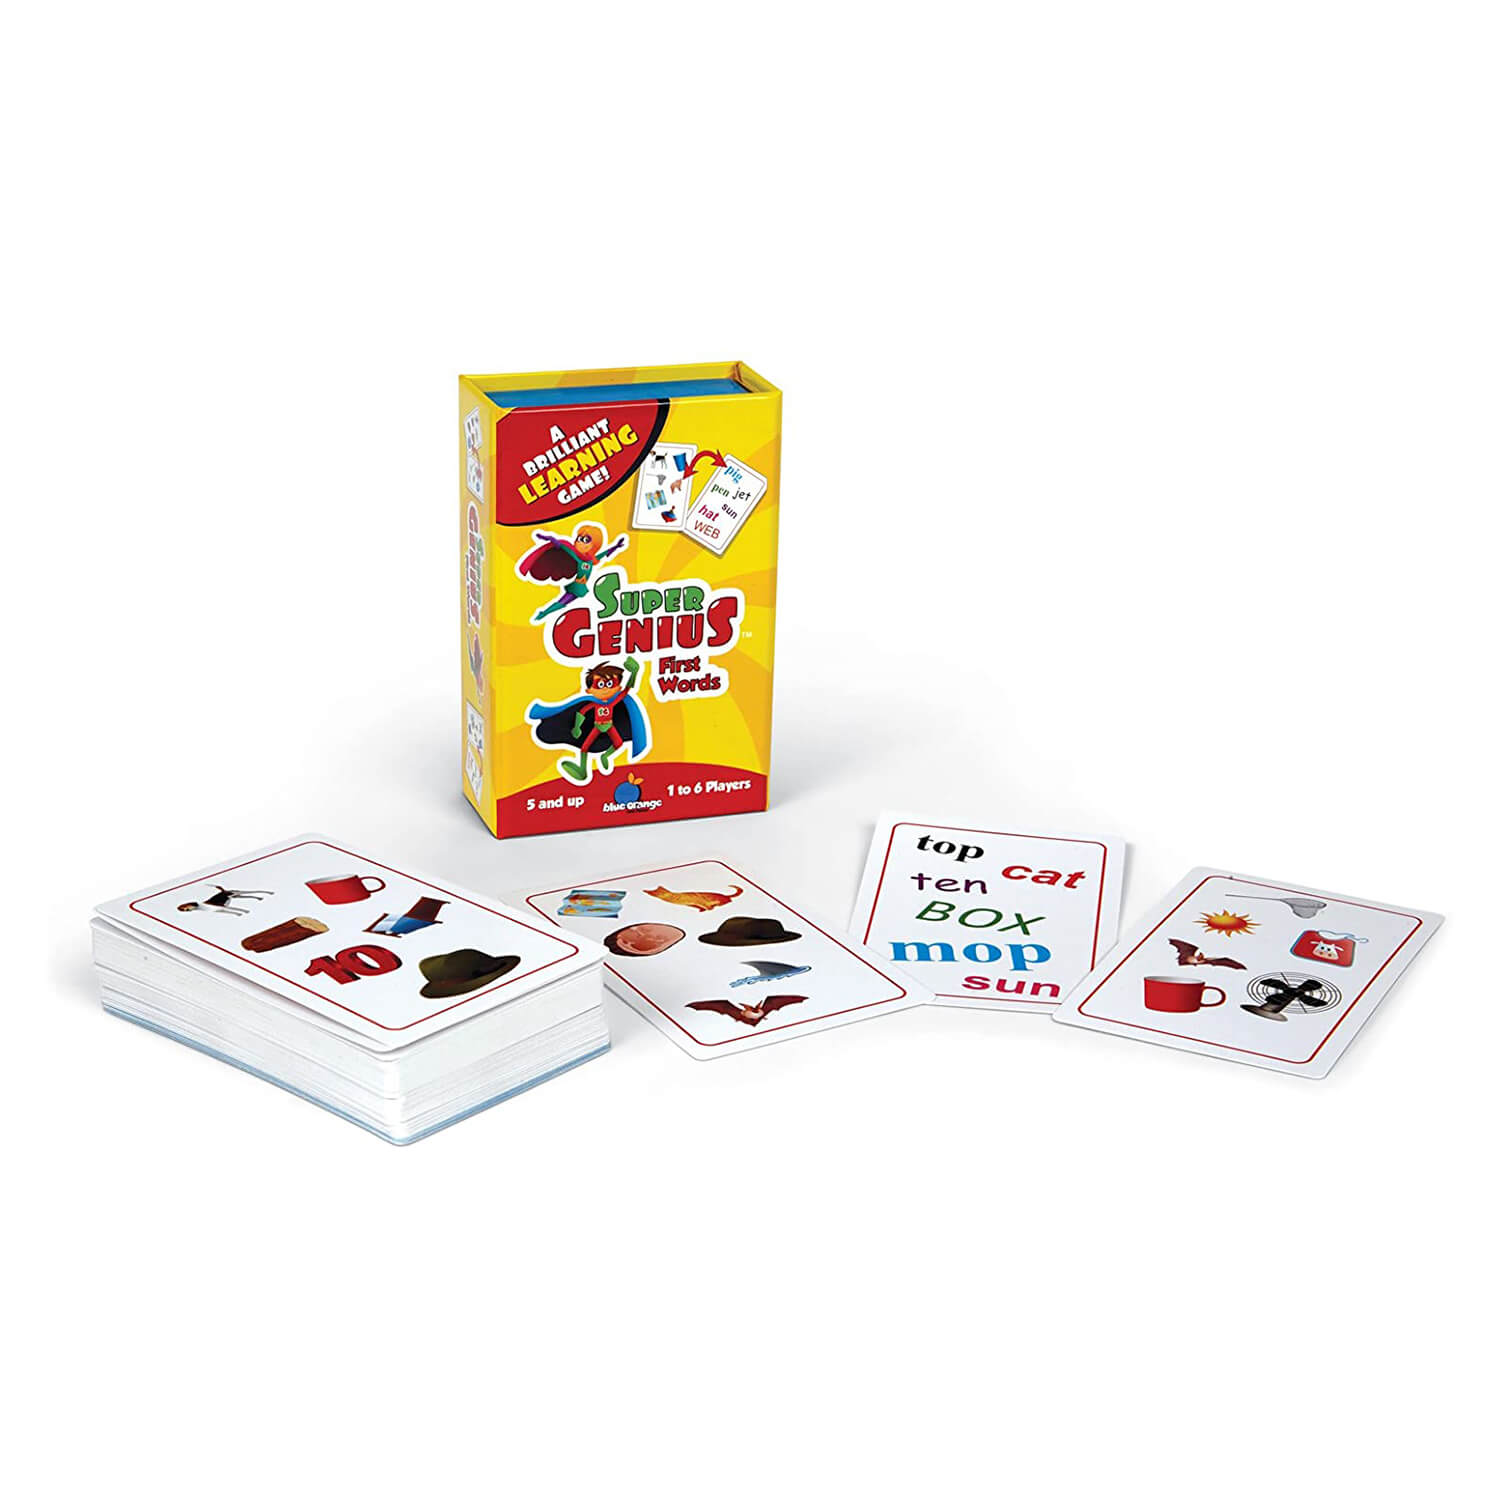 Spread view of cards included in Blue Orange Super Genius First Words Game.